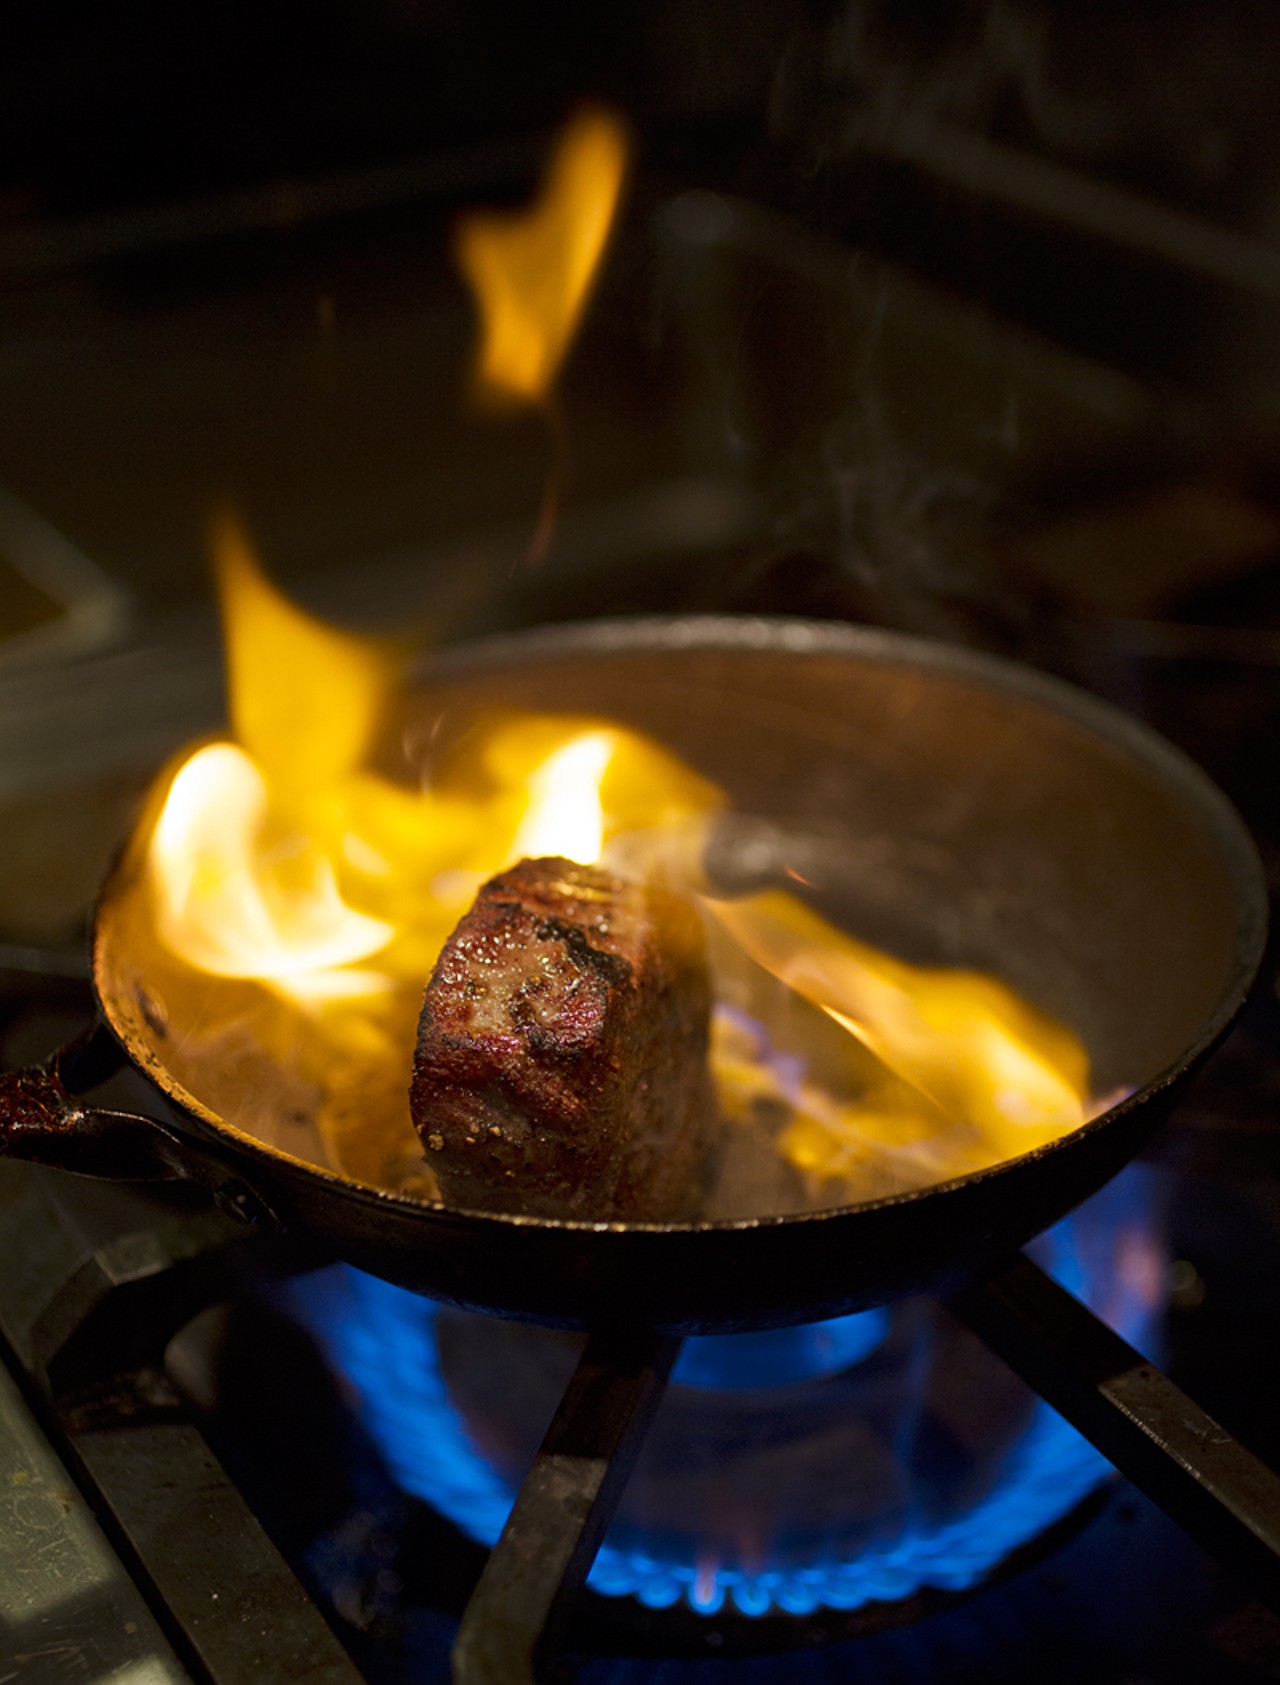 Cooking the filet mignon.